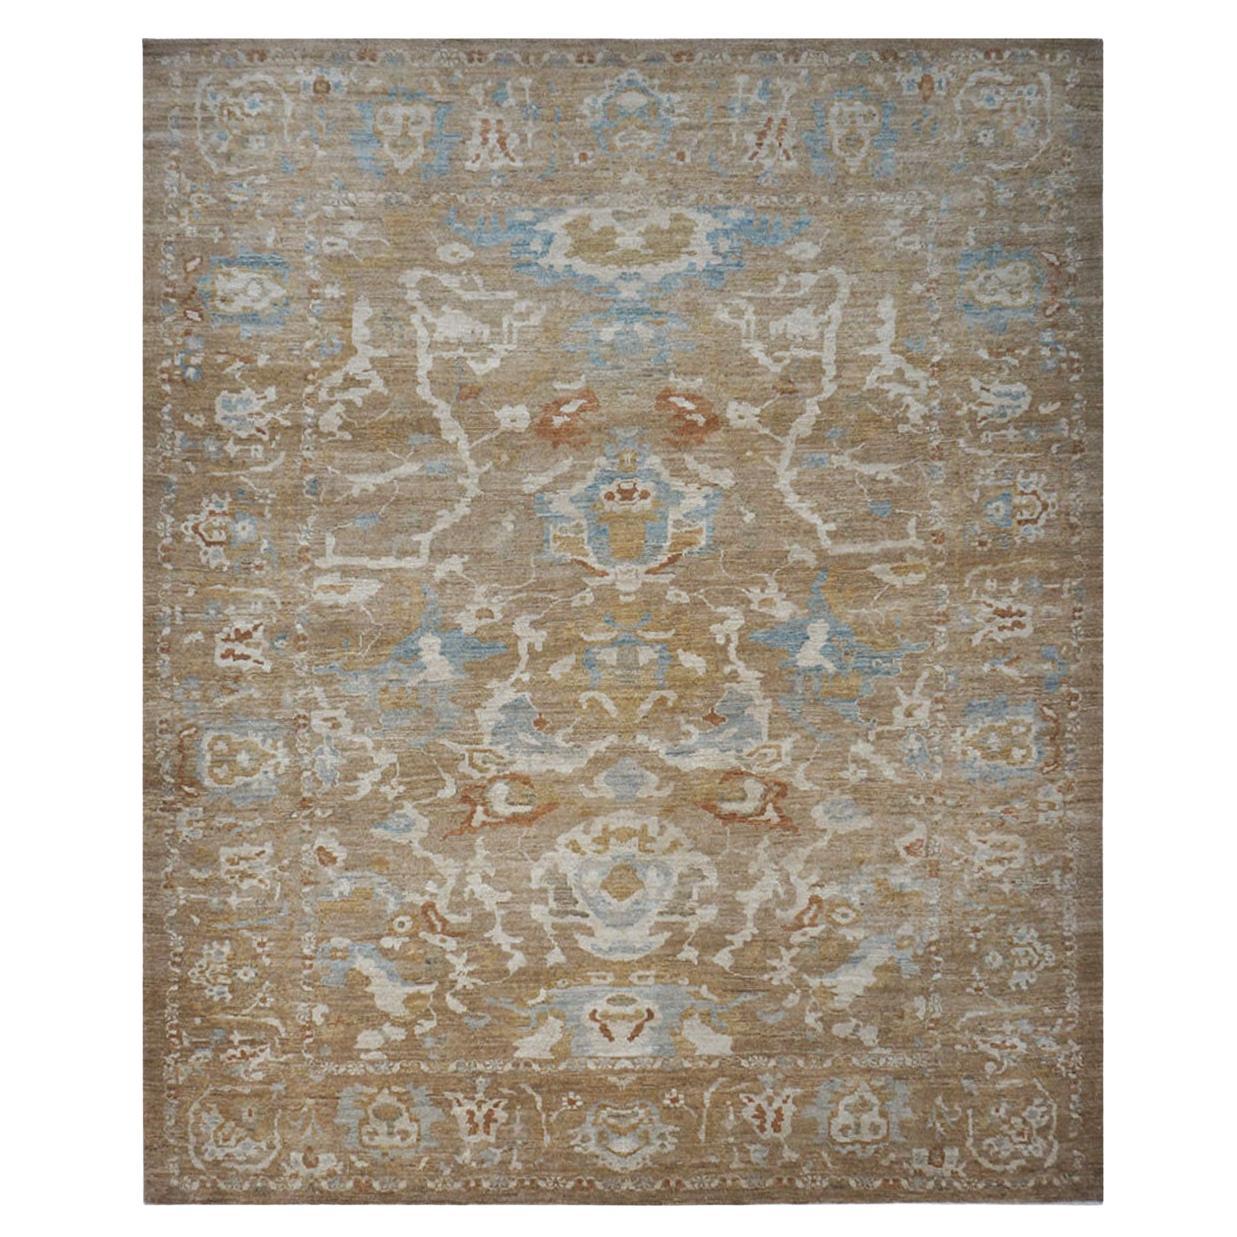 21st Century Persian Sultanabad 9x12 Brown, Ivory and Blue Handmade Area Rug